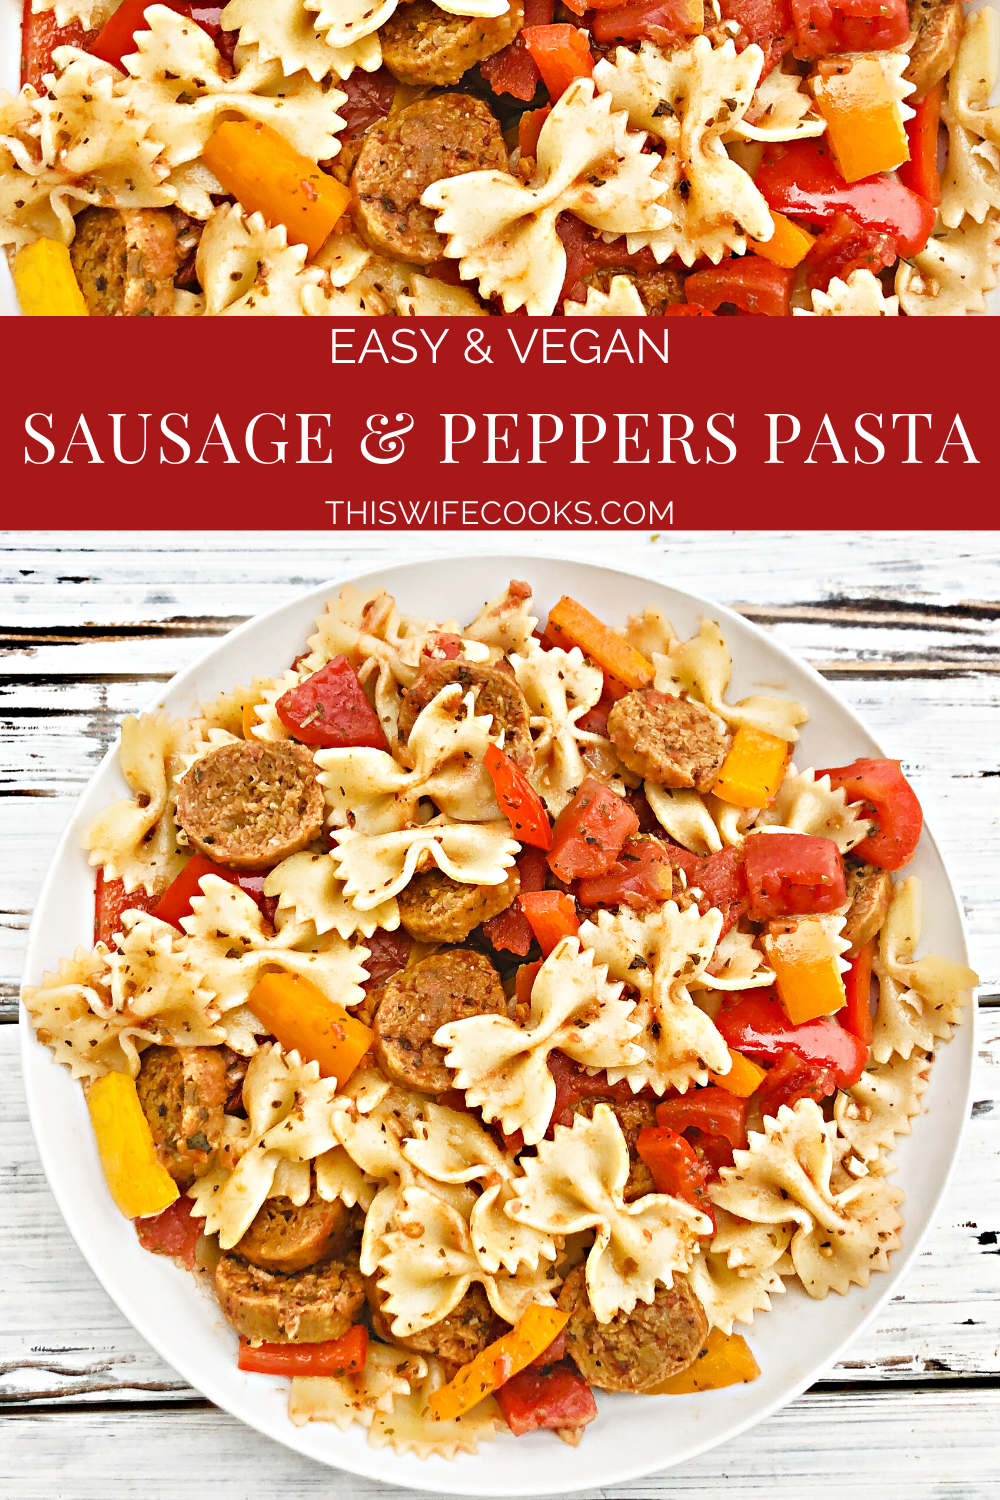 Vegan Sausage and Peppers Pasta - A quick and easy plant-based skillet dinner filled with spicy Italian sausage, colorful bell peppers, and pasta tossed together in a light and earthy tomato sauce. Ready to serve in 30 minutes or less!

#sausageandpeppers #easyvegandinners #30minutemeals #vegansausagerecipes #thiswifecooksrecipes #quickandeasydinners #veganquarantinecooking #sausageandpepperspasta via @thiswifecooks